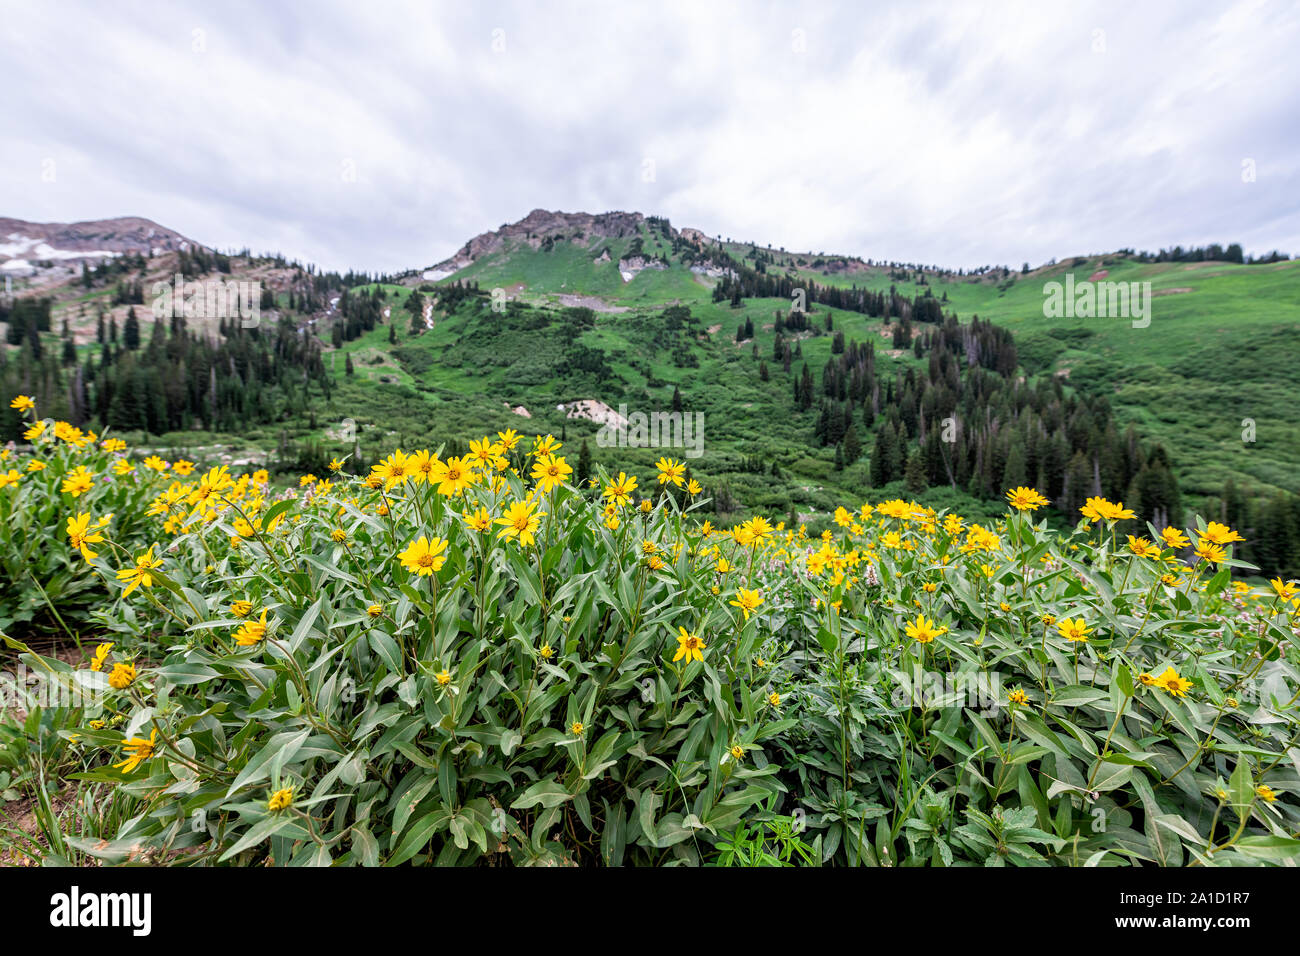 Albion Basin, Utah summer 2019 meadows trail wide angle view of yellow Arnica flowers in wildflowers season in Wasatch mountains Stock Photo